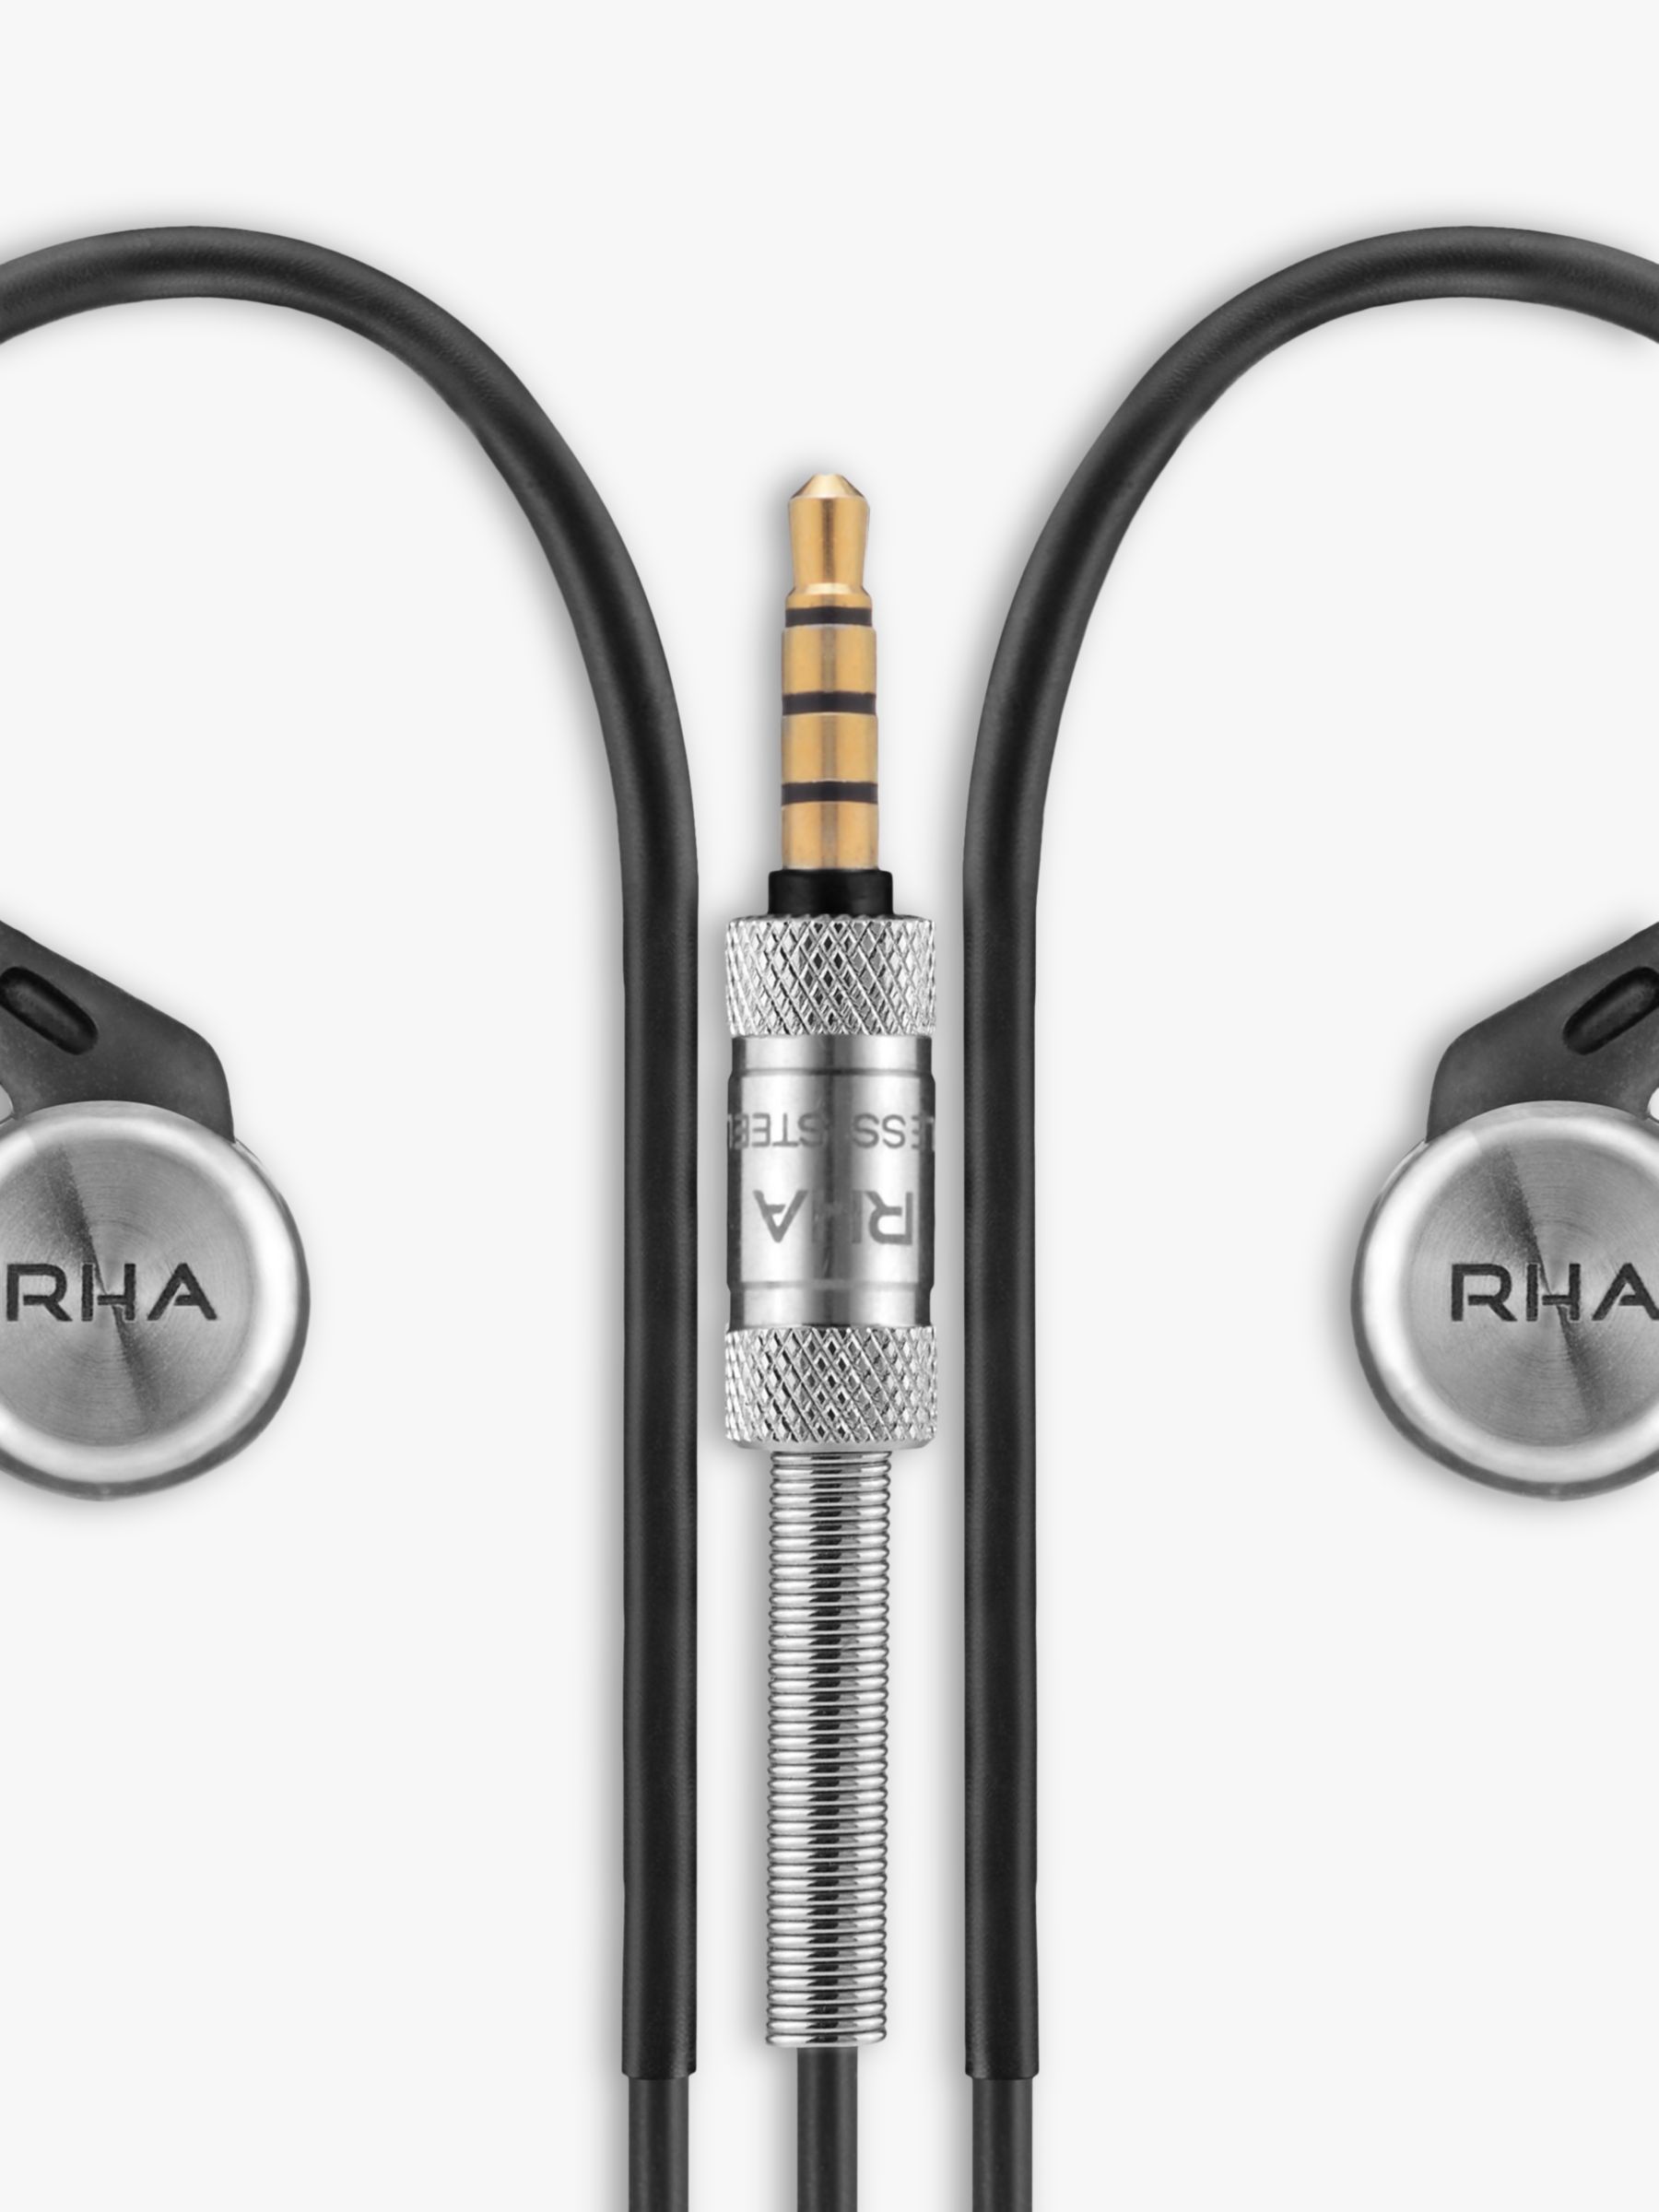 RHA MA750i In-Ear Headphones with High Resolution Audio & Mic/Remote for iOS, Black Review thumbnail